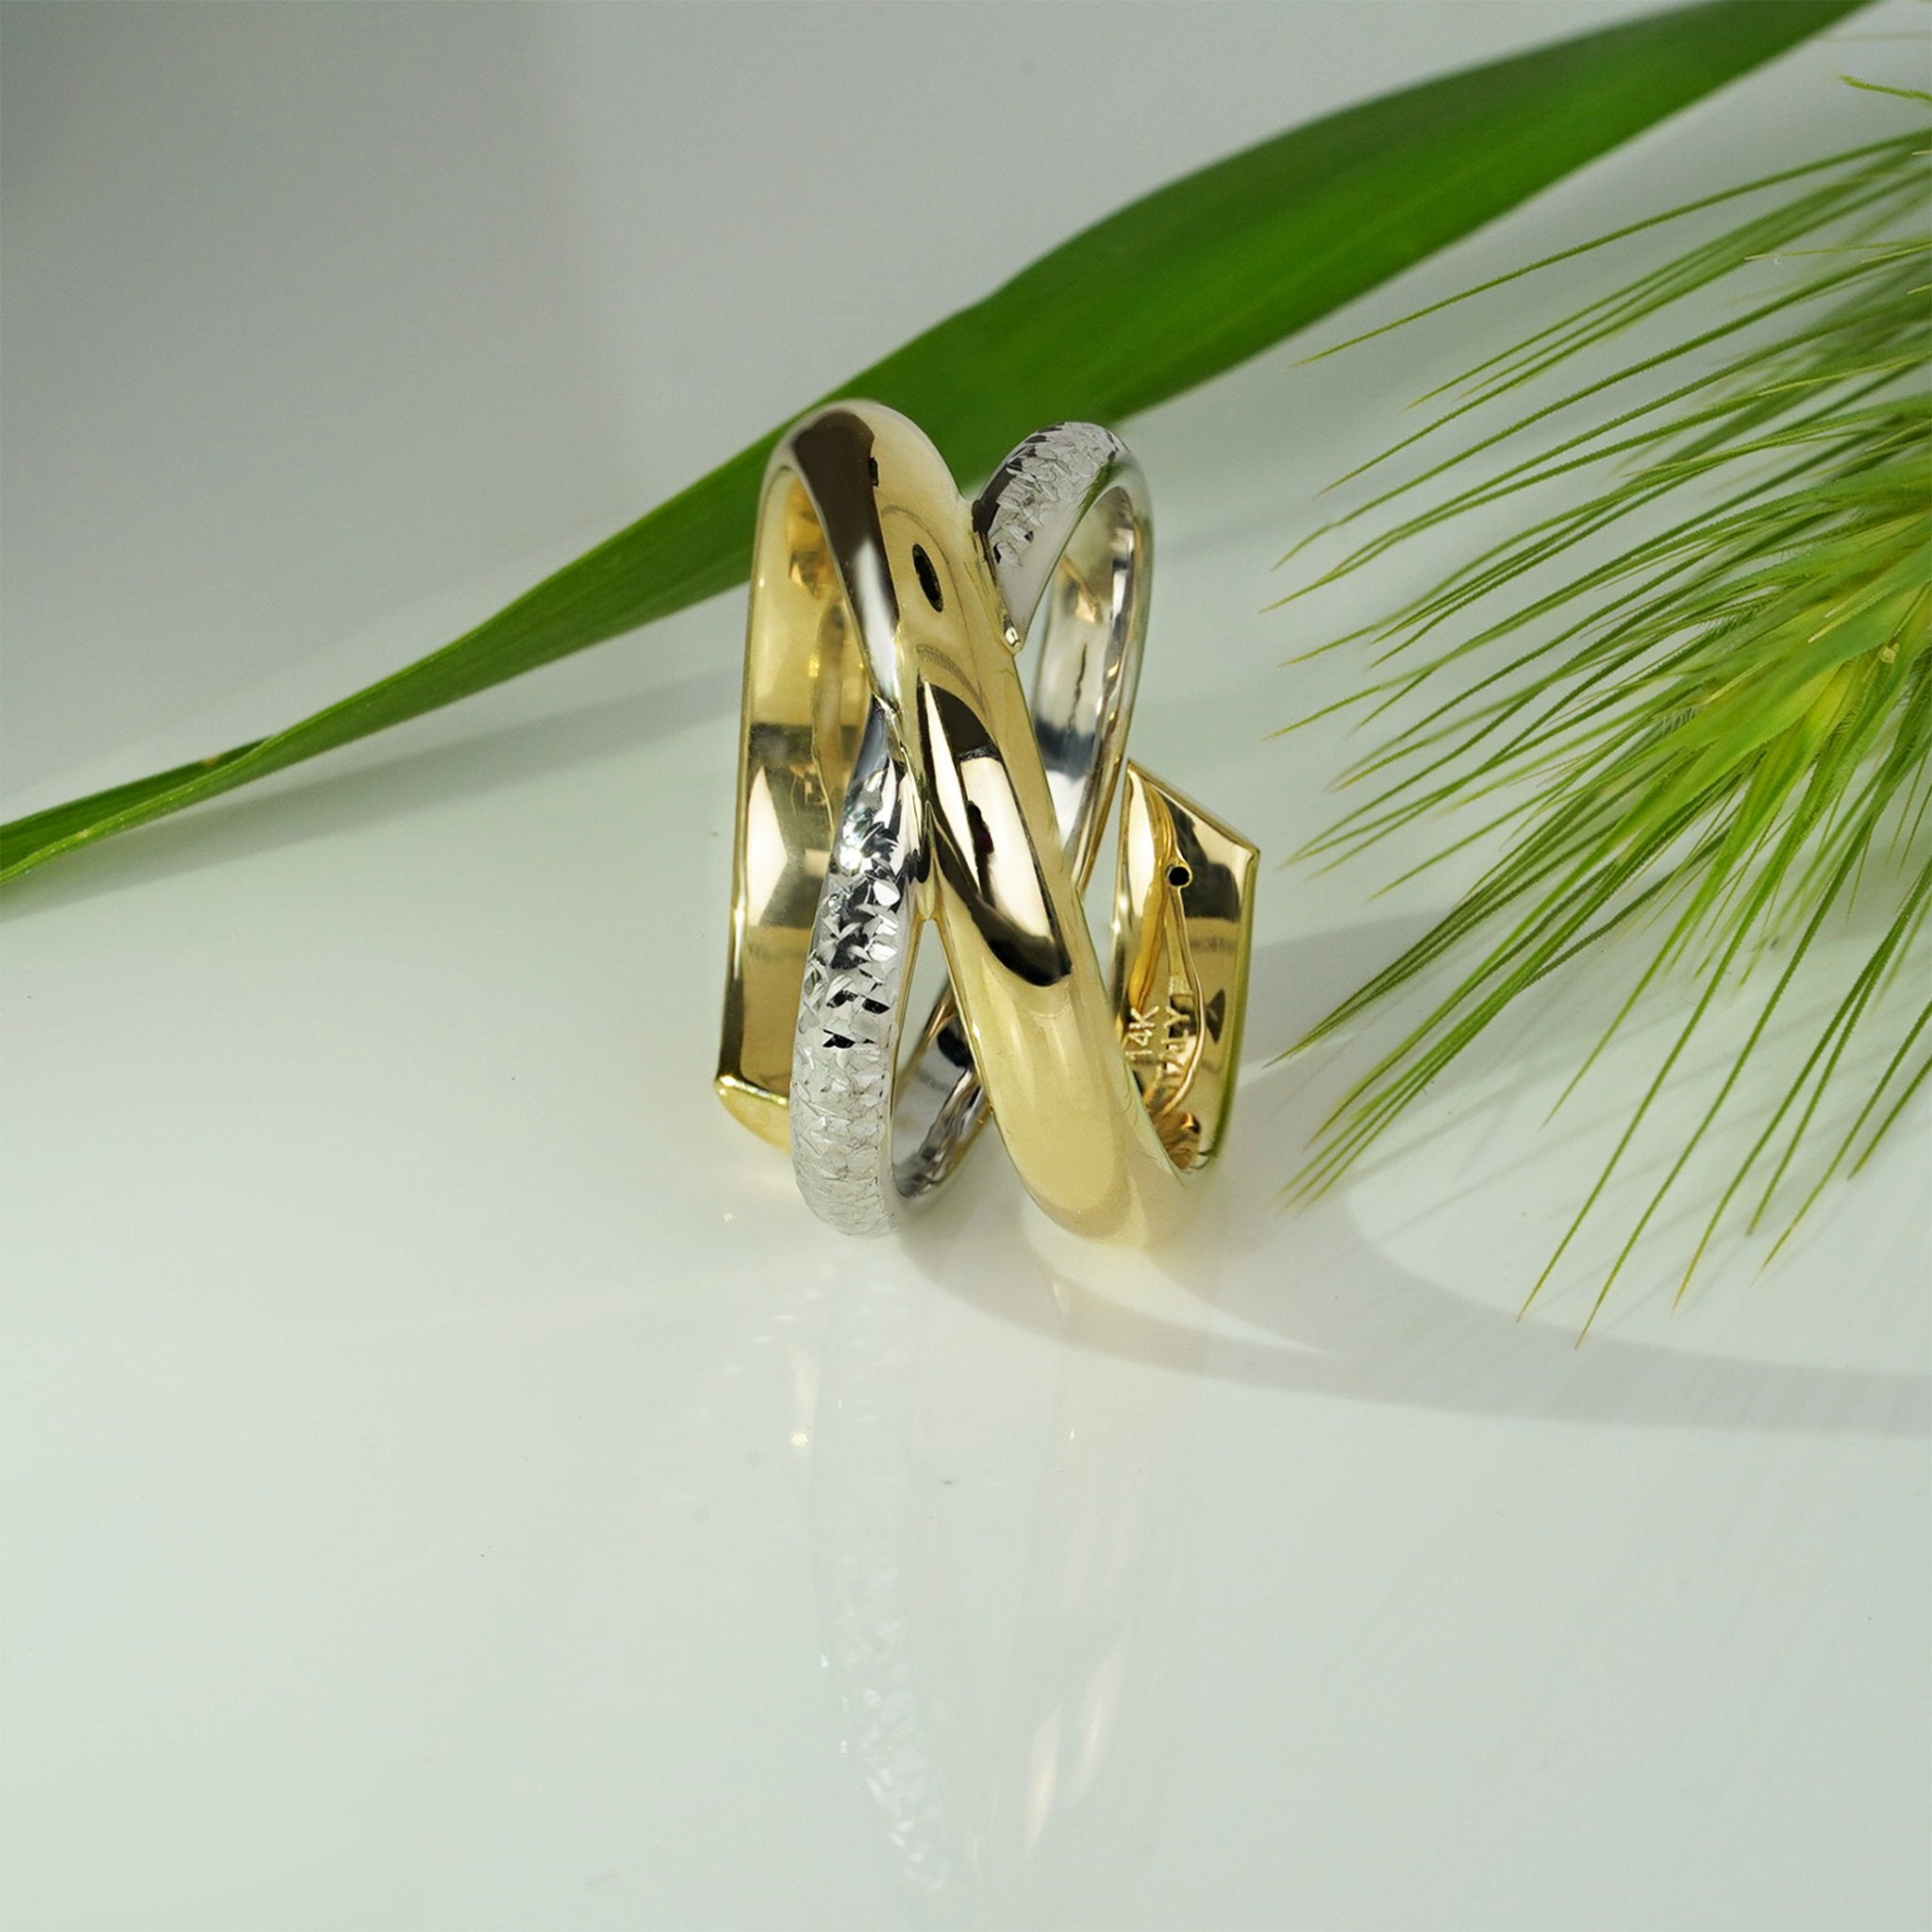 Helina Adjustable Dainty Gold Solitaire Stackable Ring - Waterproof Rings